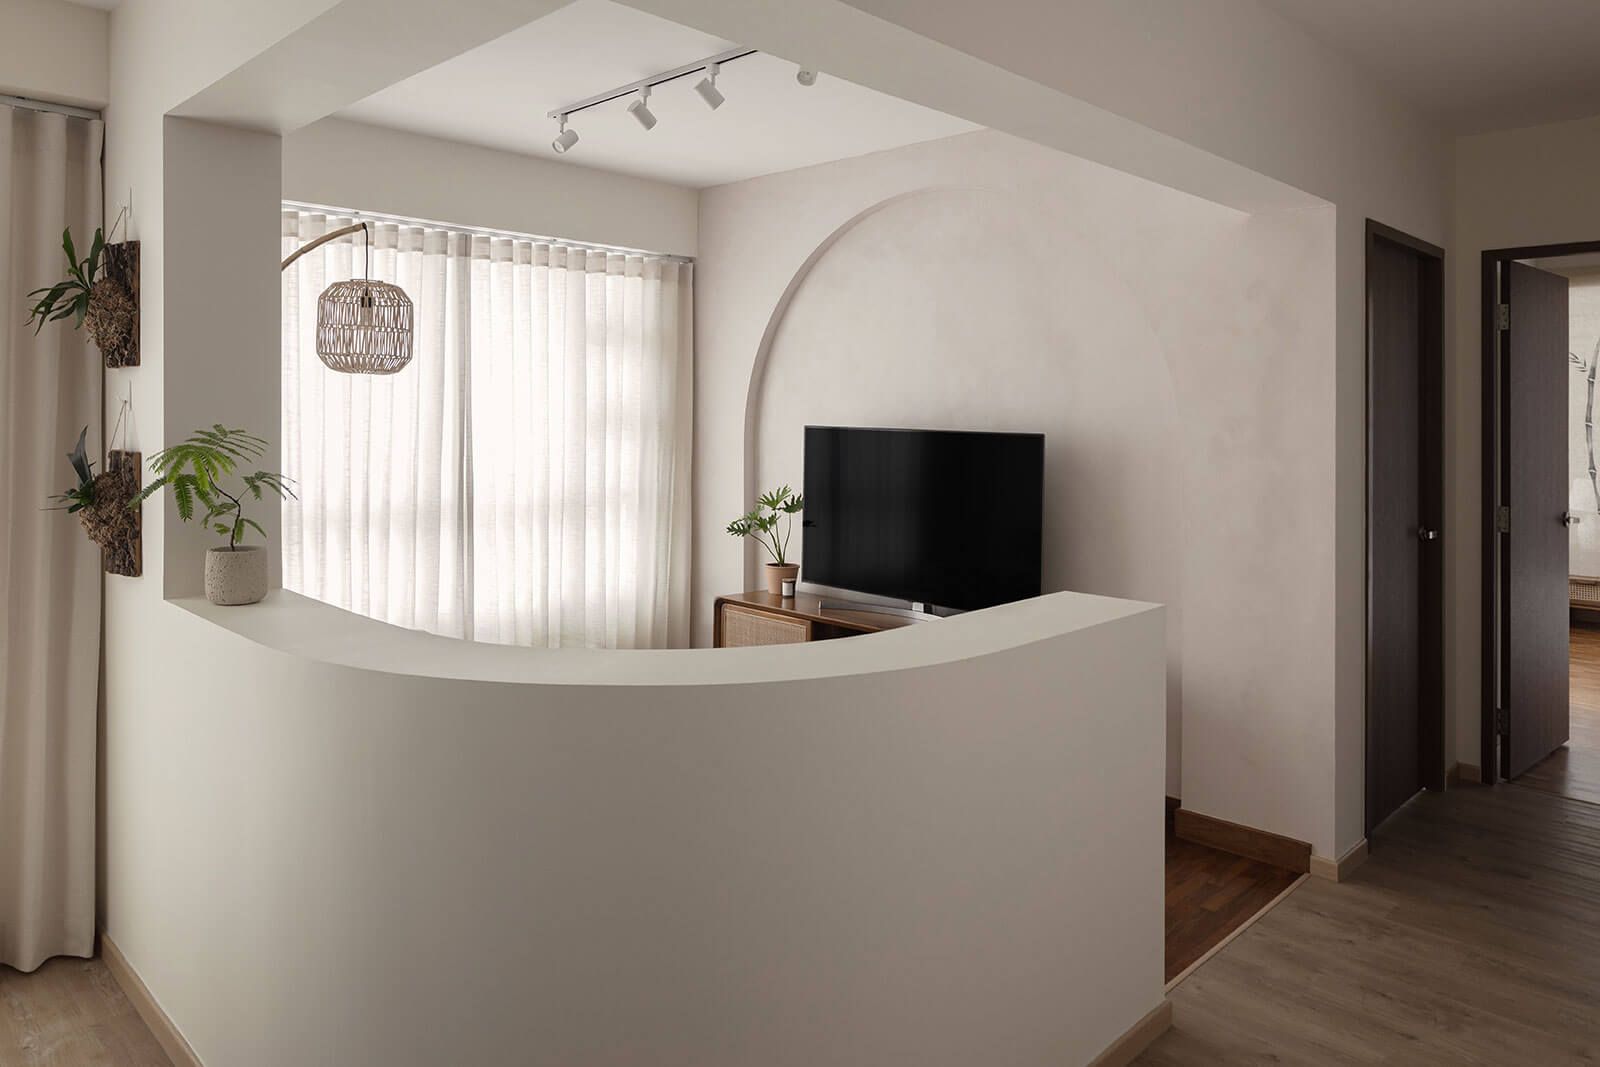 Modern minimalist TV wall design featuring a curved wall niche with a flat-screen TV, wooden console, and hanging plants against sheer curtains and wooden flooring.